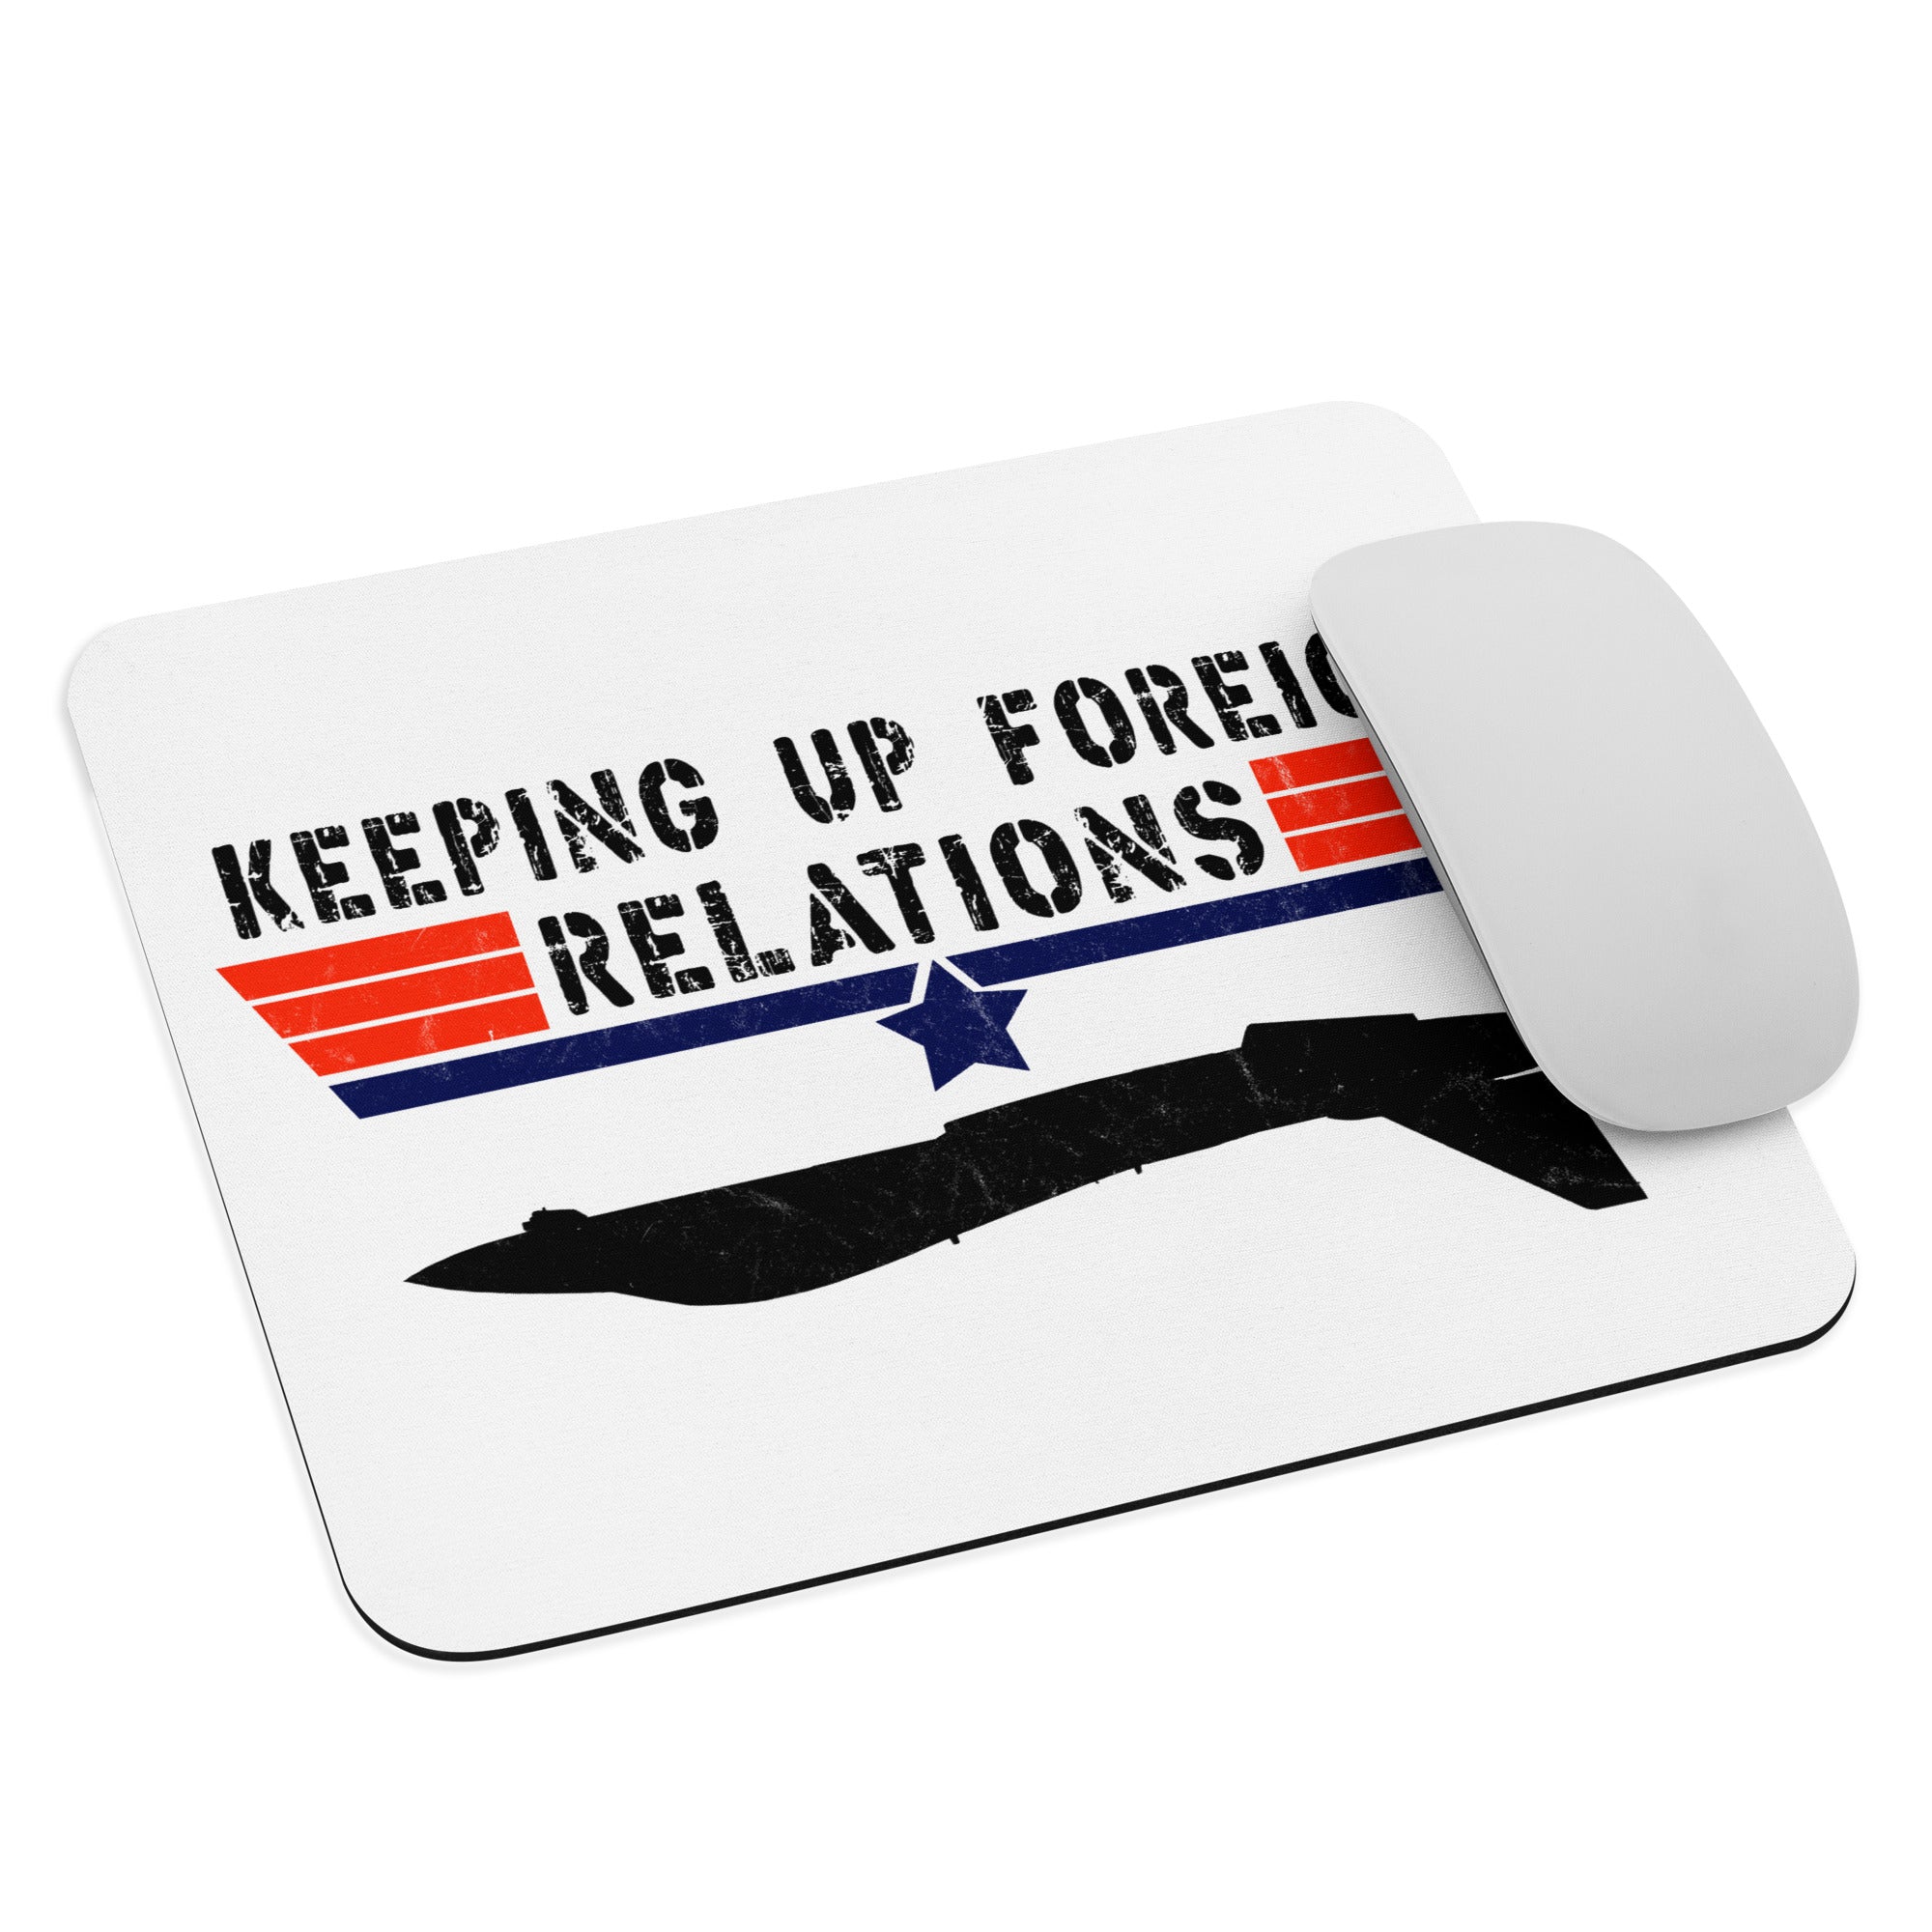 Keeping Up Foreign Relations F-14 Tomcat Mouse pad